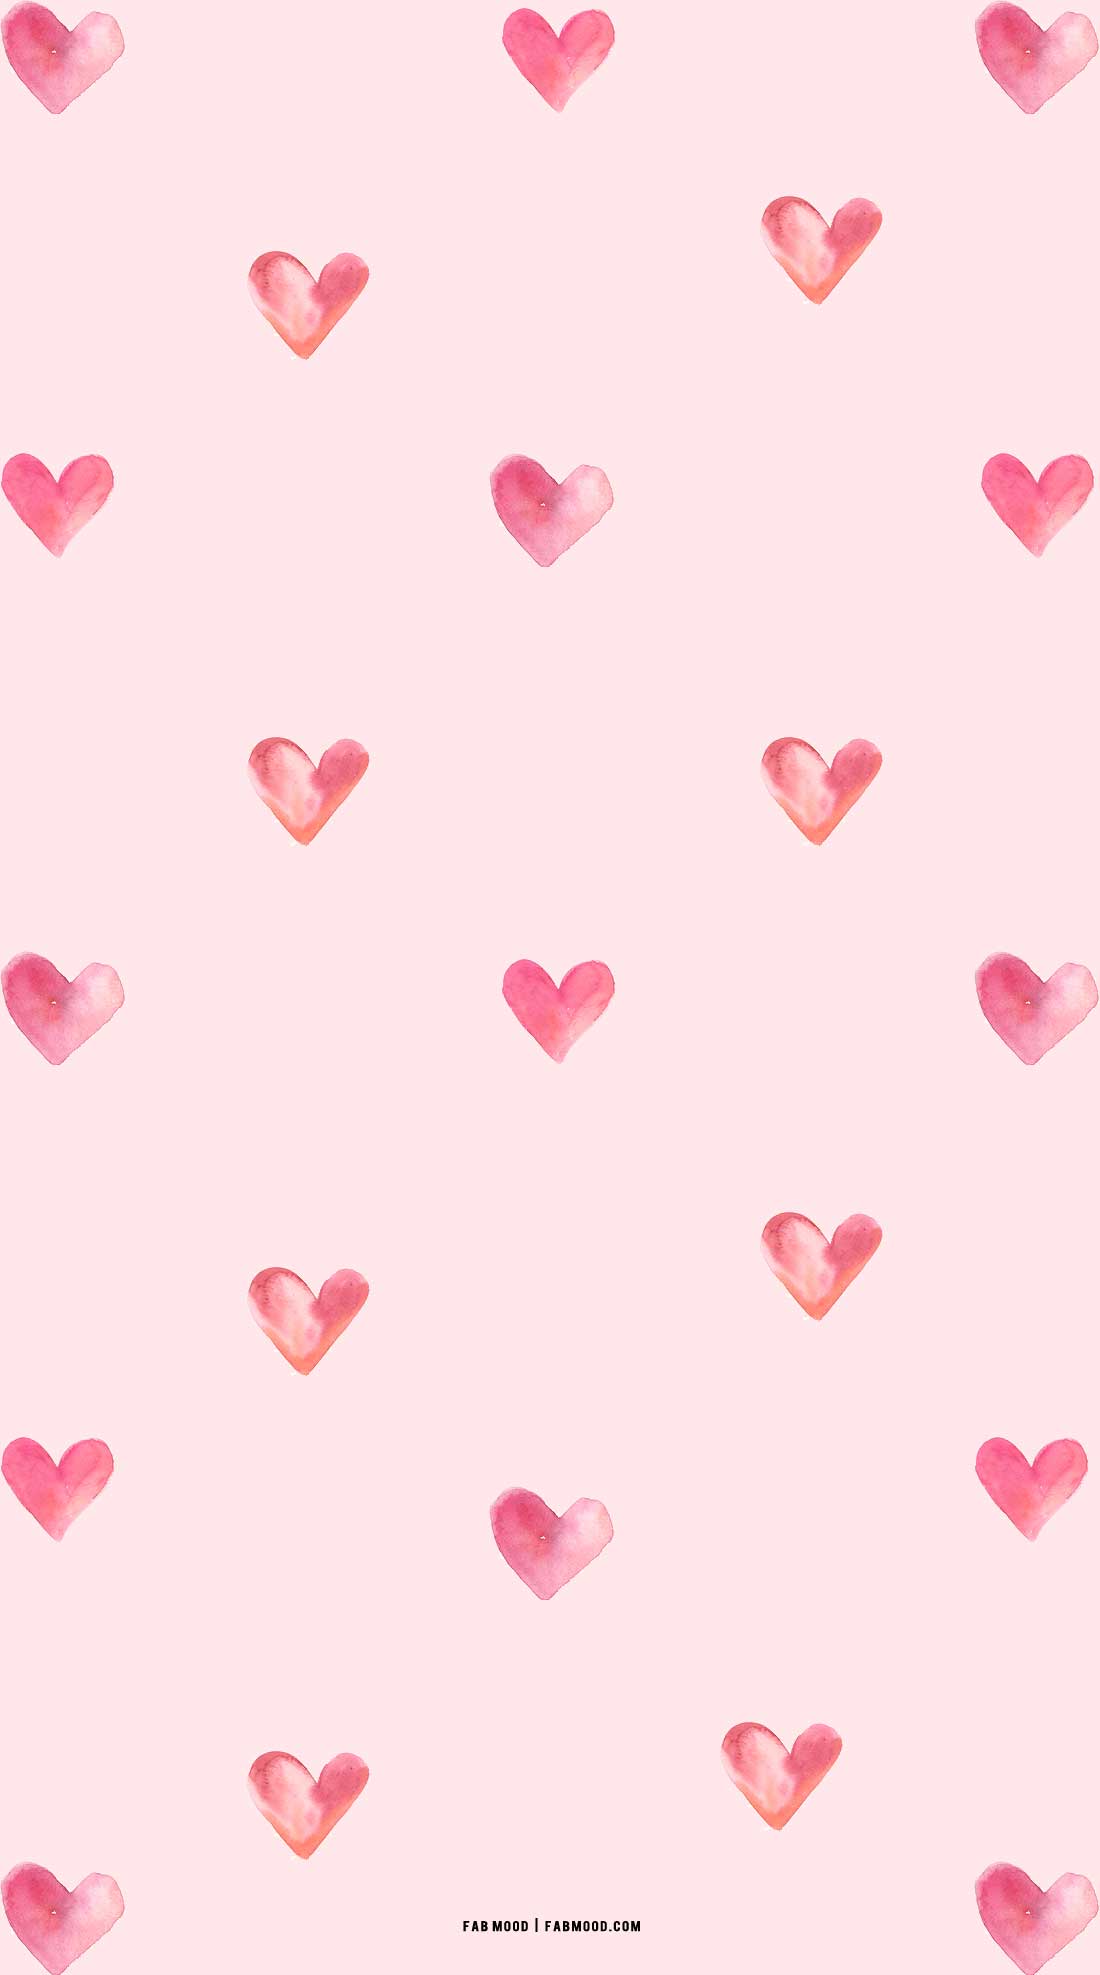 Floating Heart Valentine's Day Wallpaper 1 - Fab Mood